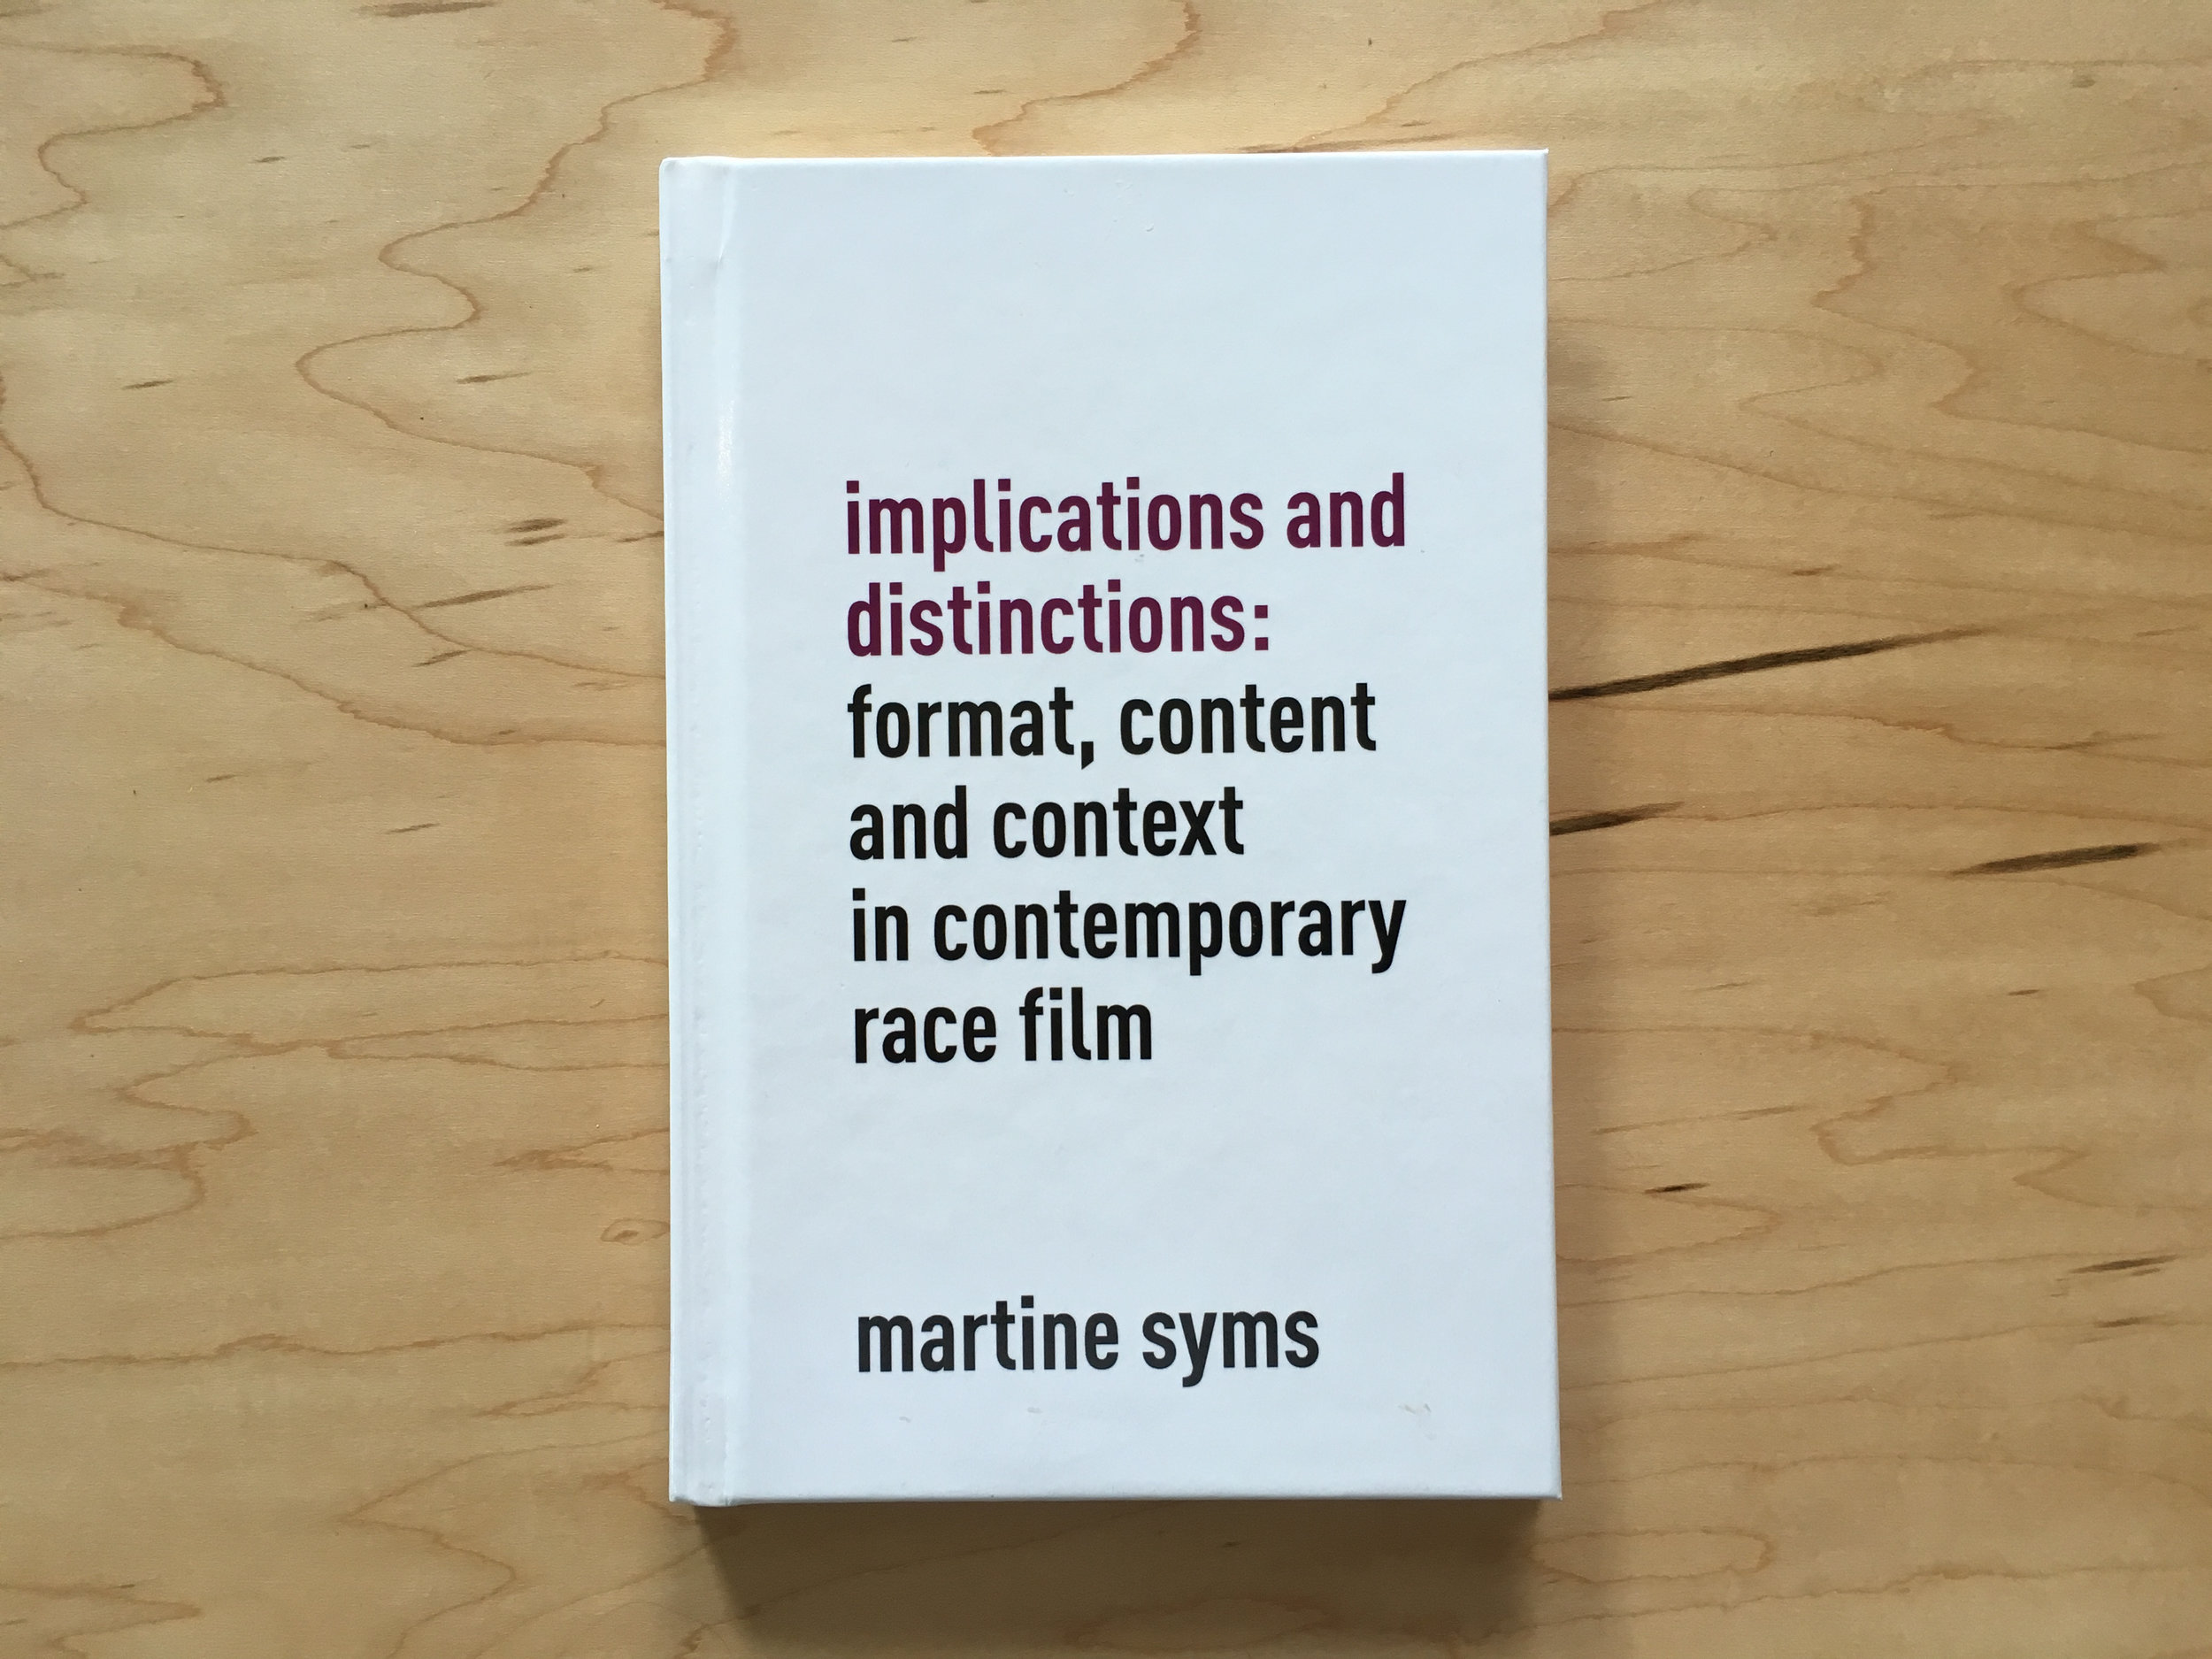  Cover: Martine Syms,  Implications and Distinctions: Format, Content and Context in Contemporary Race Film  (Houston: Future Plan and Program, 2011). 